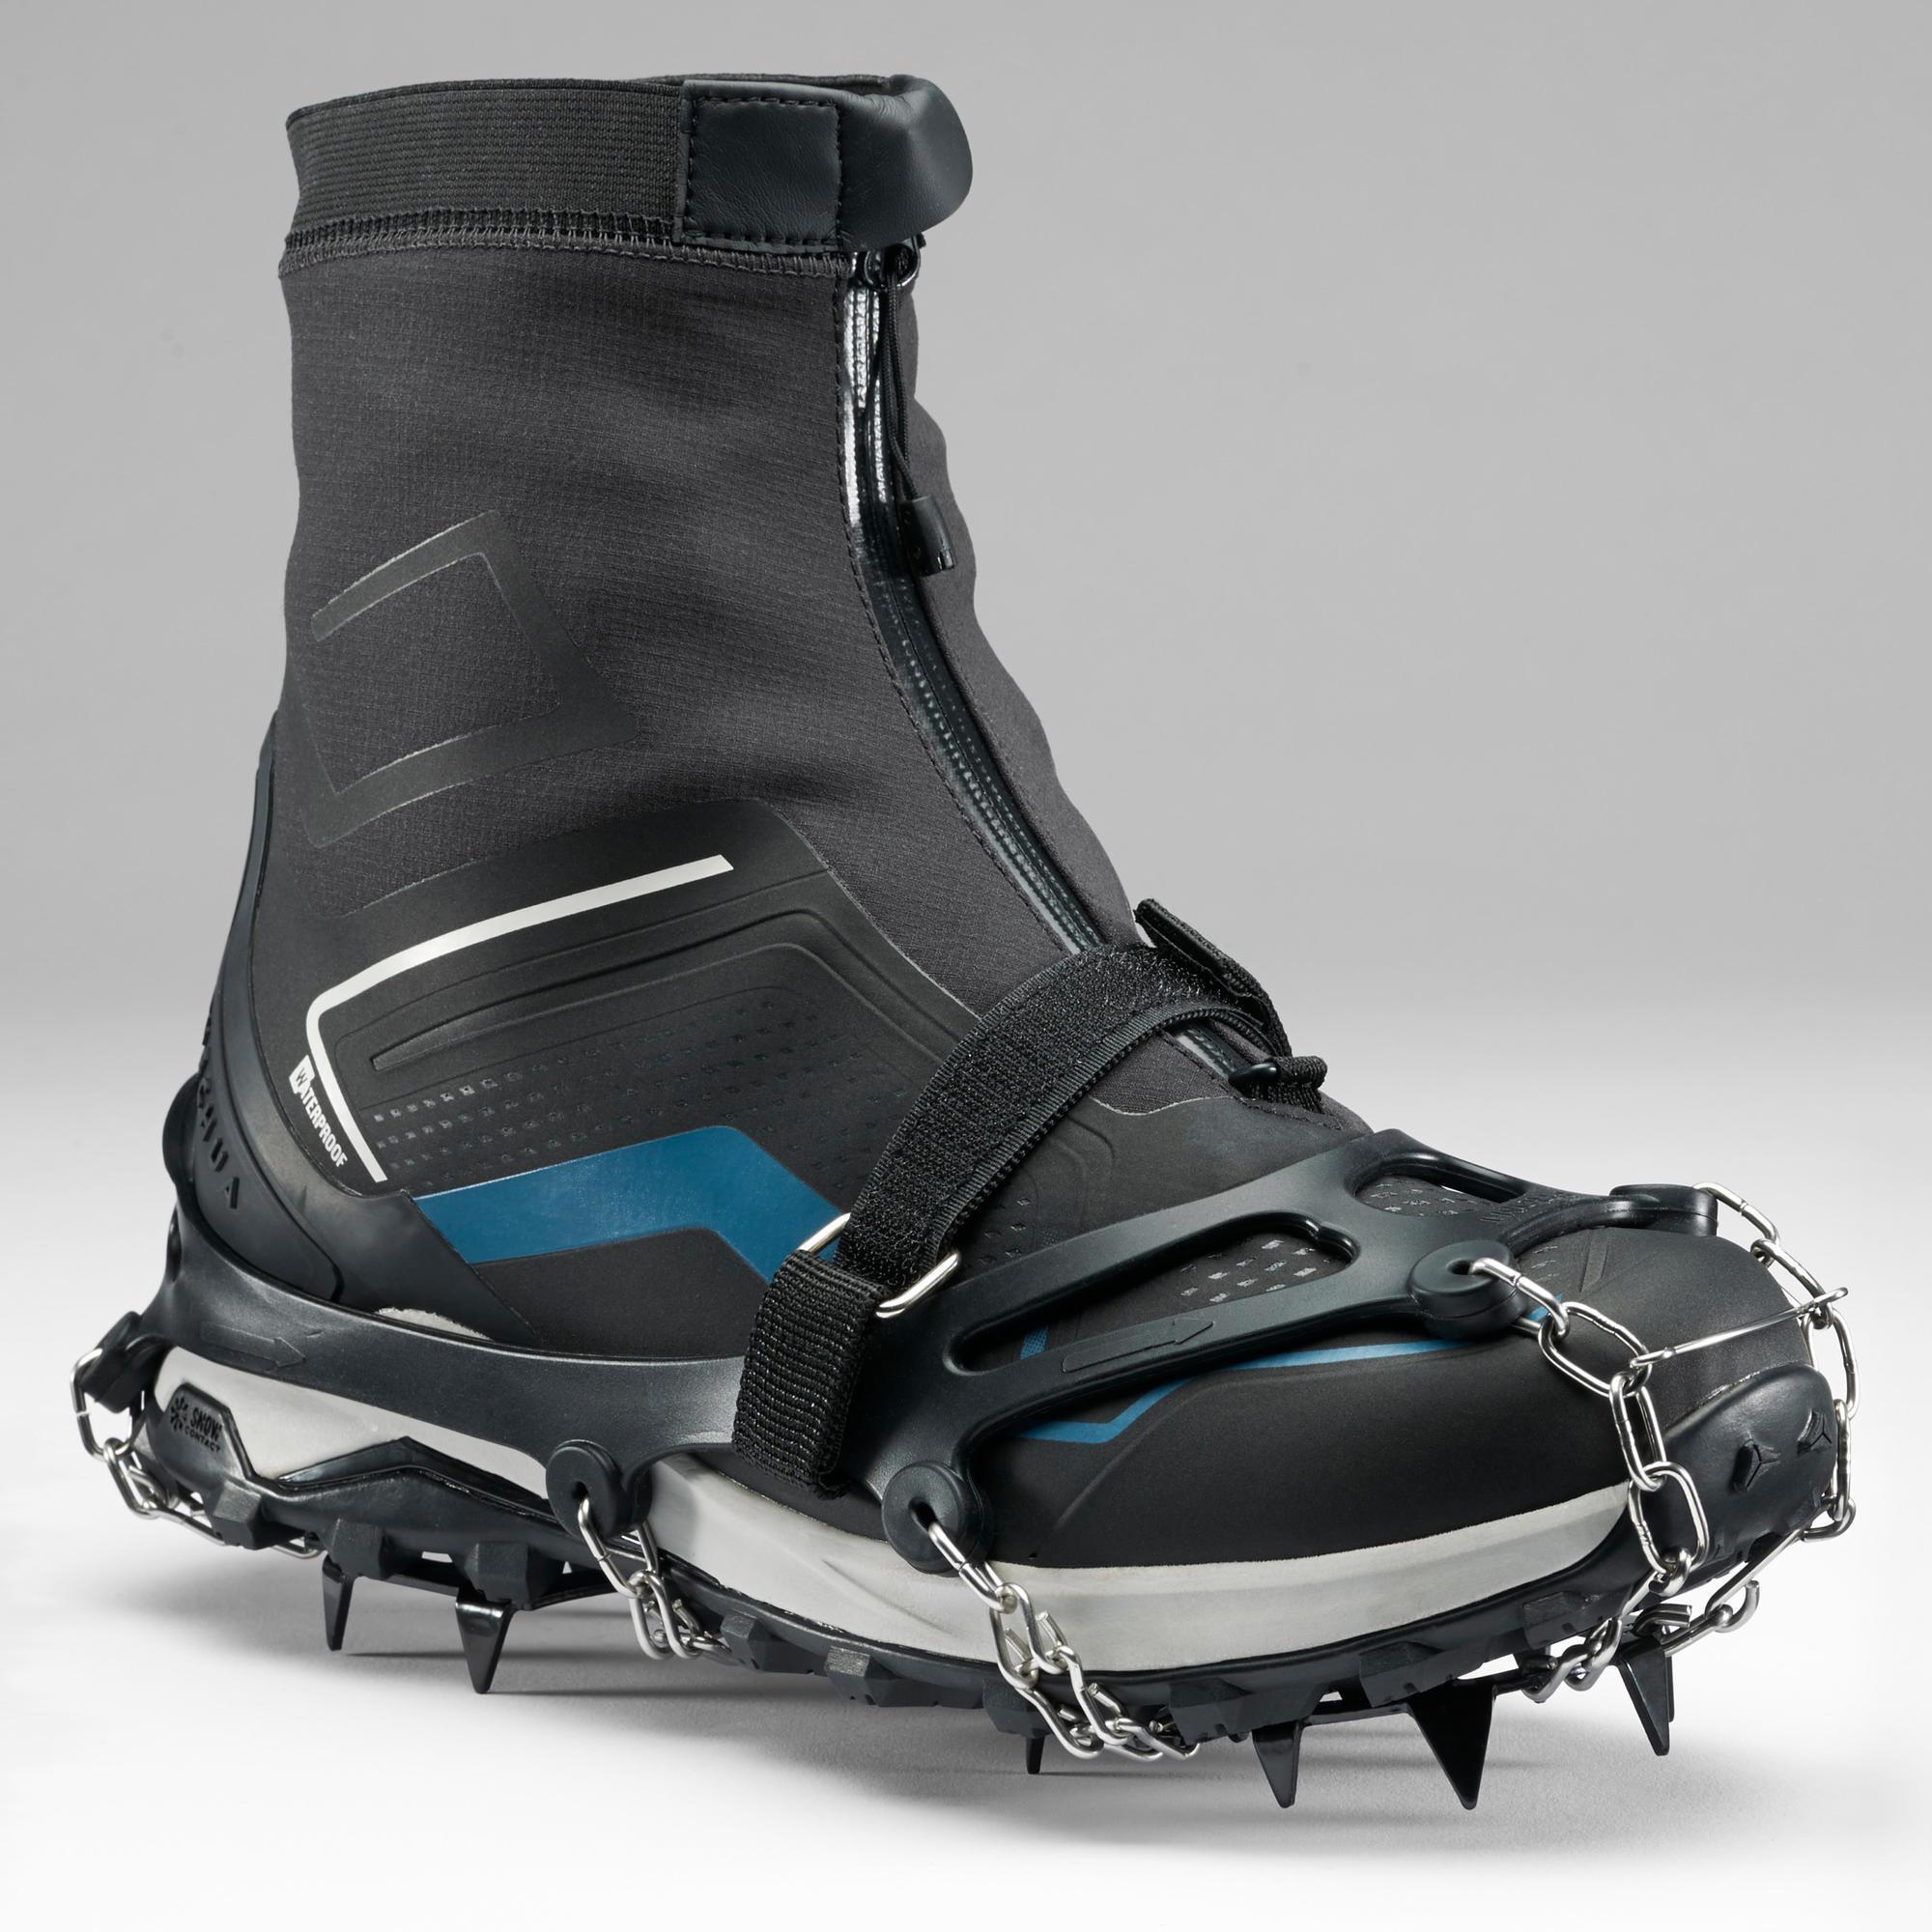 ADULT SNOW SHOES - SH900 - S TO XL 2/10